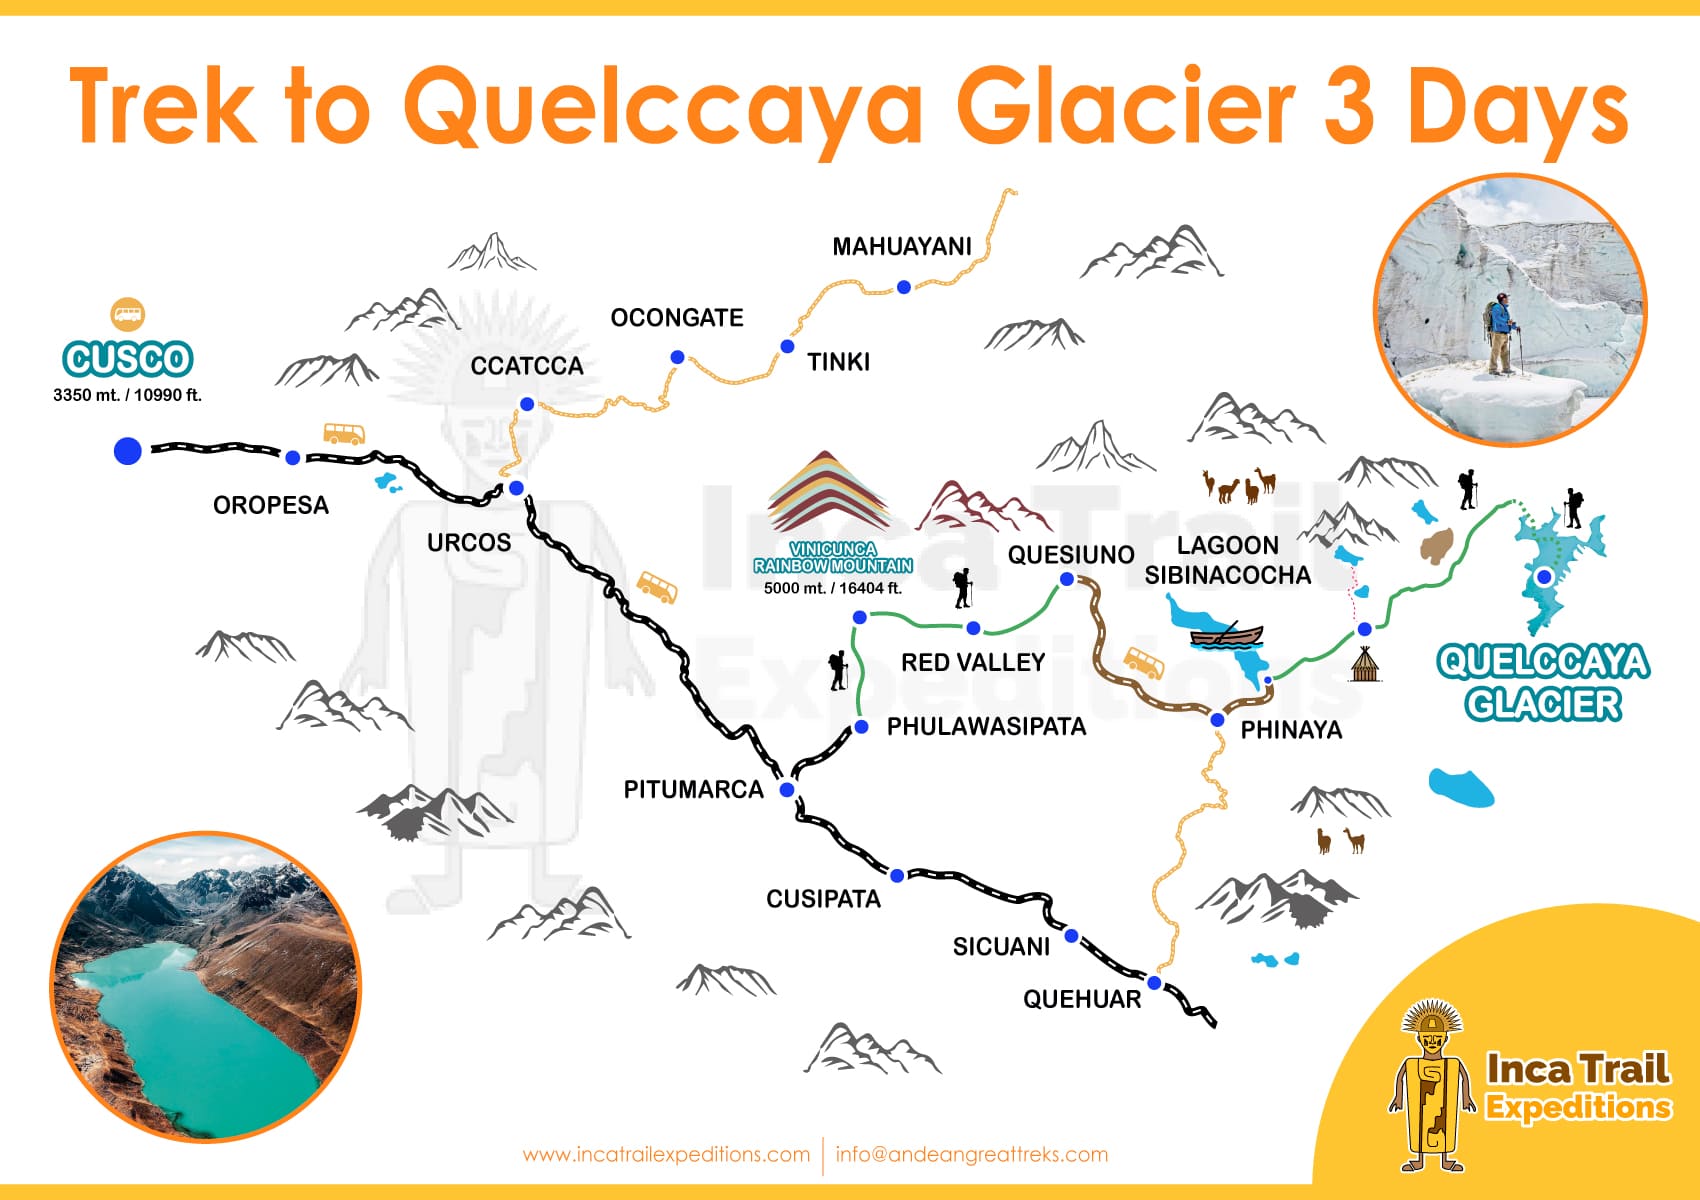 TREK-TO-QUELCCAYA-GLACIER-3-DAYS-BY-INCA-TRAIL-EXPEDITIONS